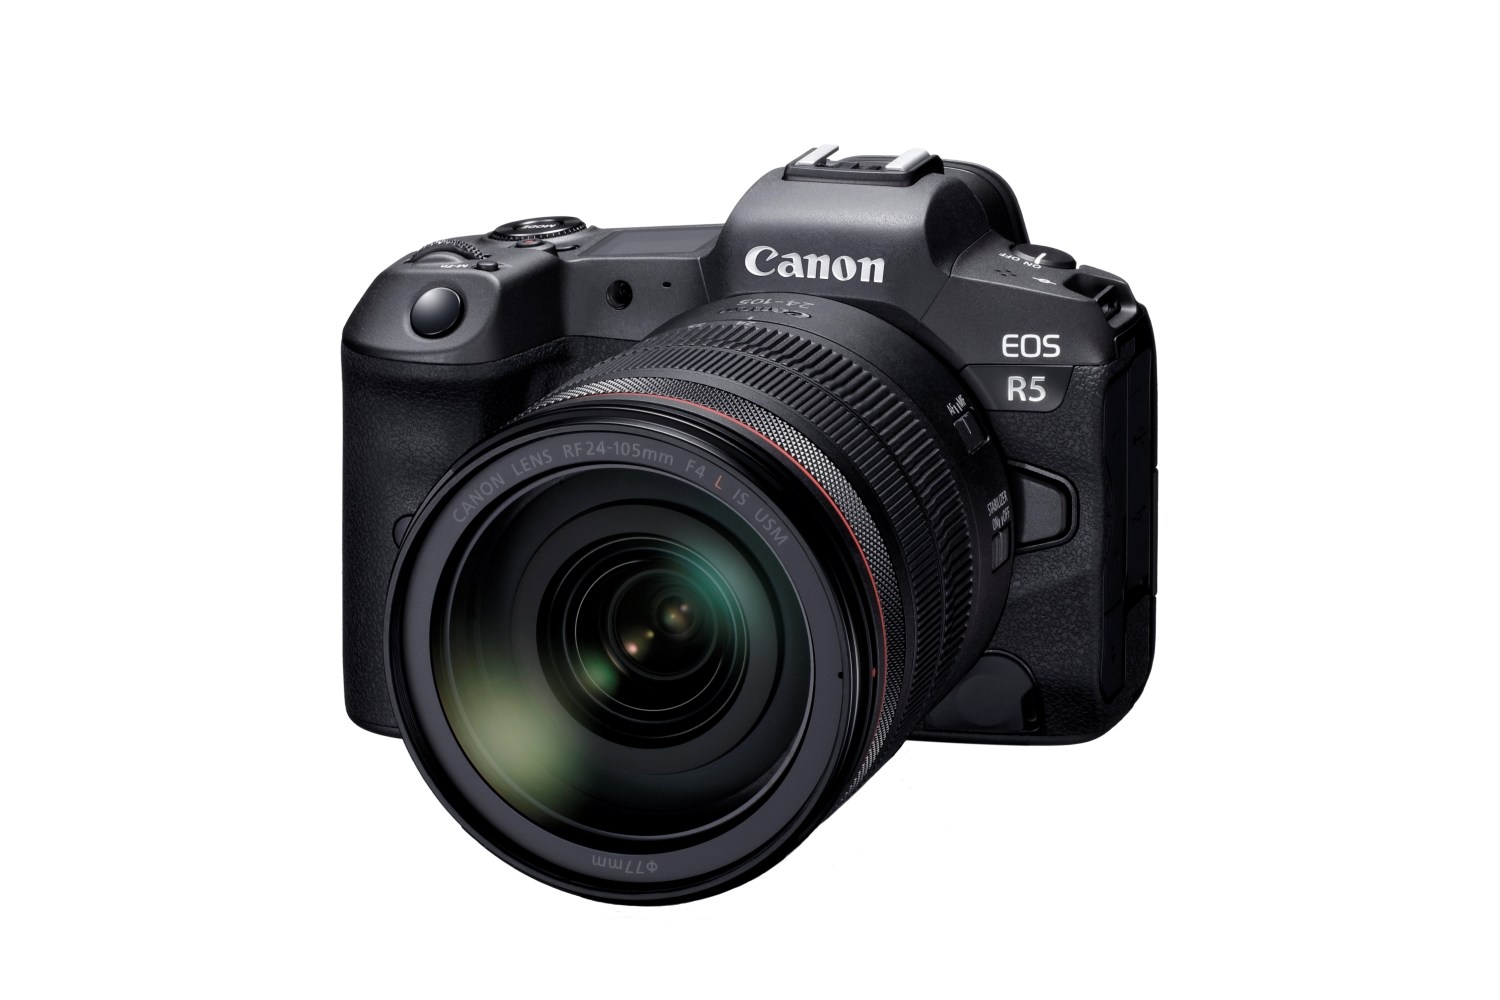 The Canon EOS R5 Will Be a 5D Series Mirrorless Camera